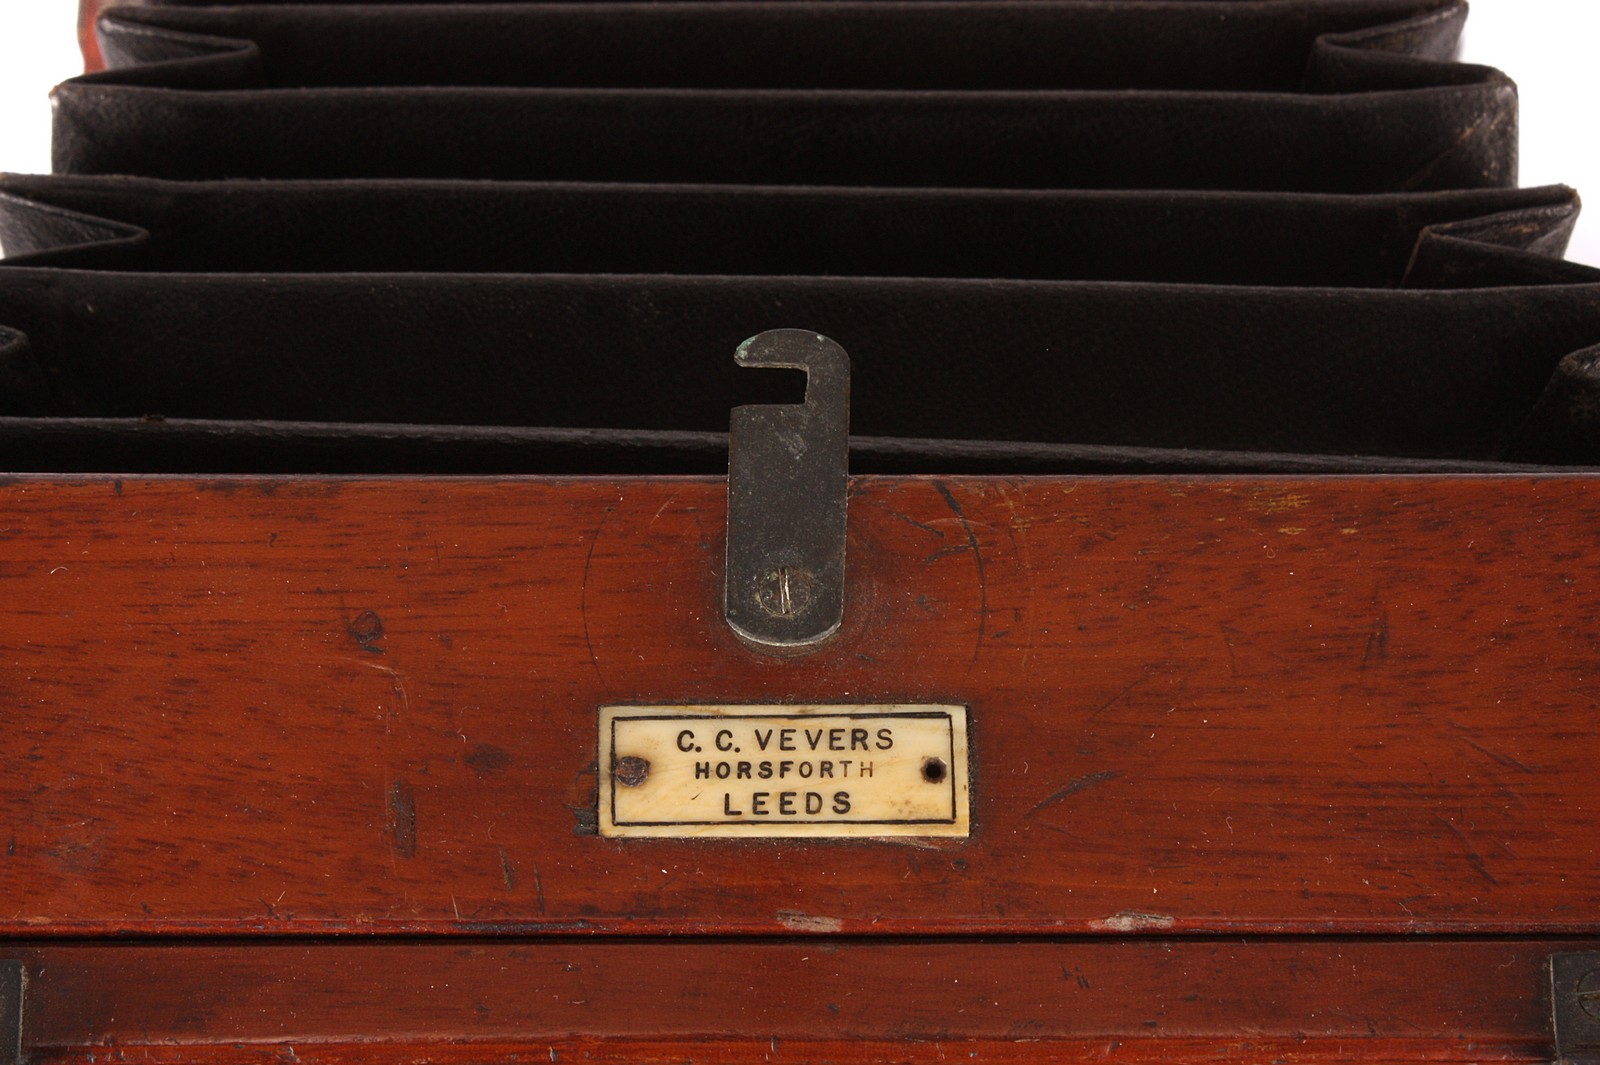 A C. C. Vevers Mahogany Field Camera, 4½x6¼, with C. C. Vevers 7x5” Waterhouse-stop brass lens, - Image 3 of 3